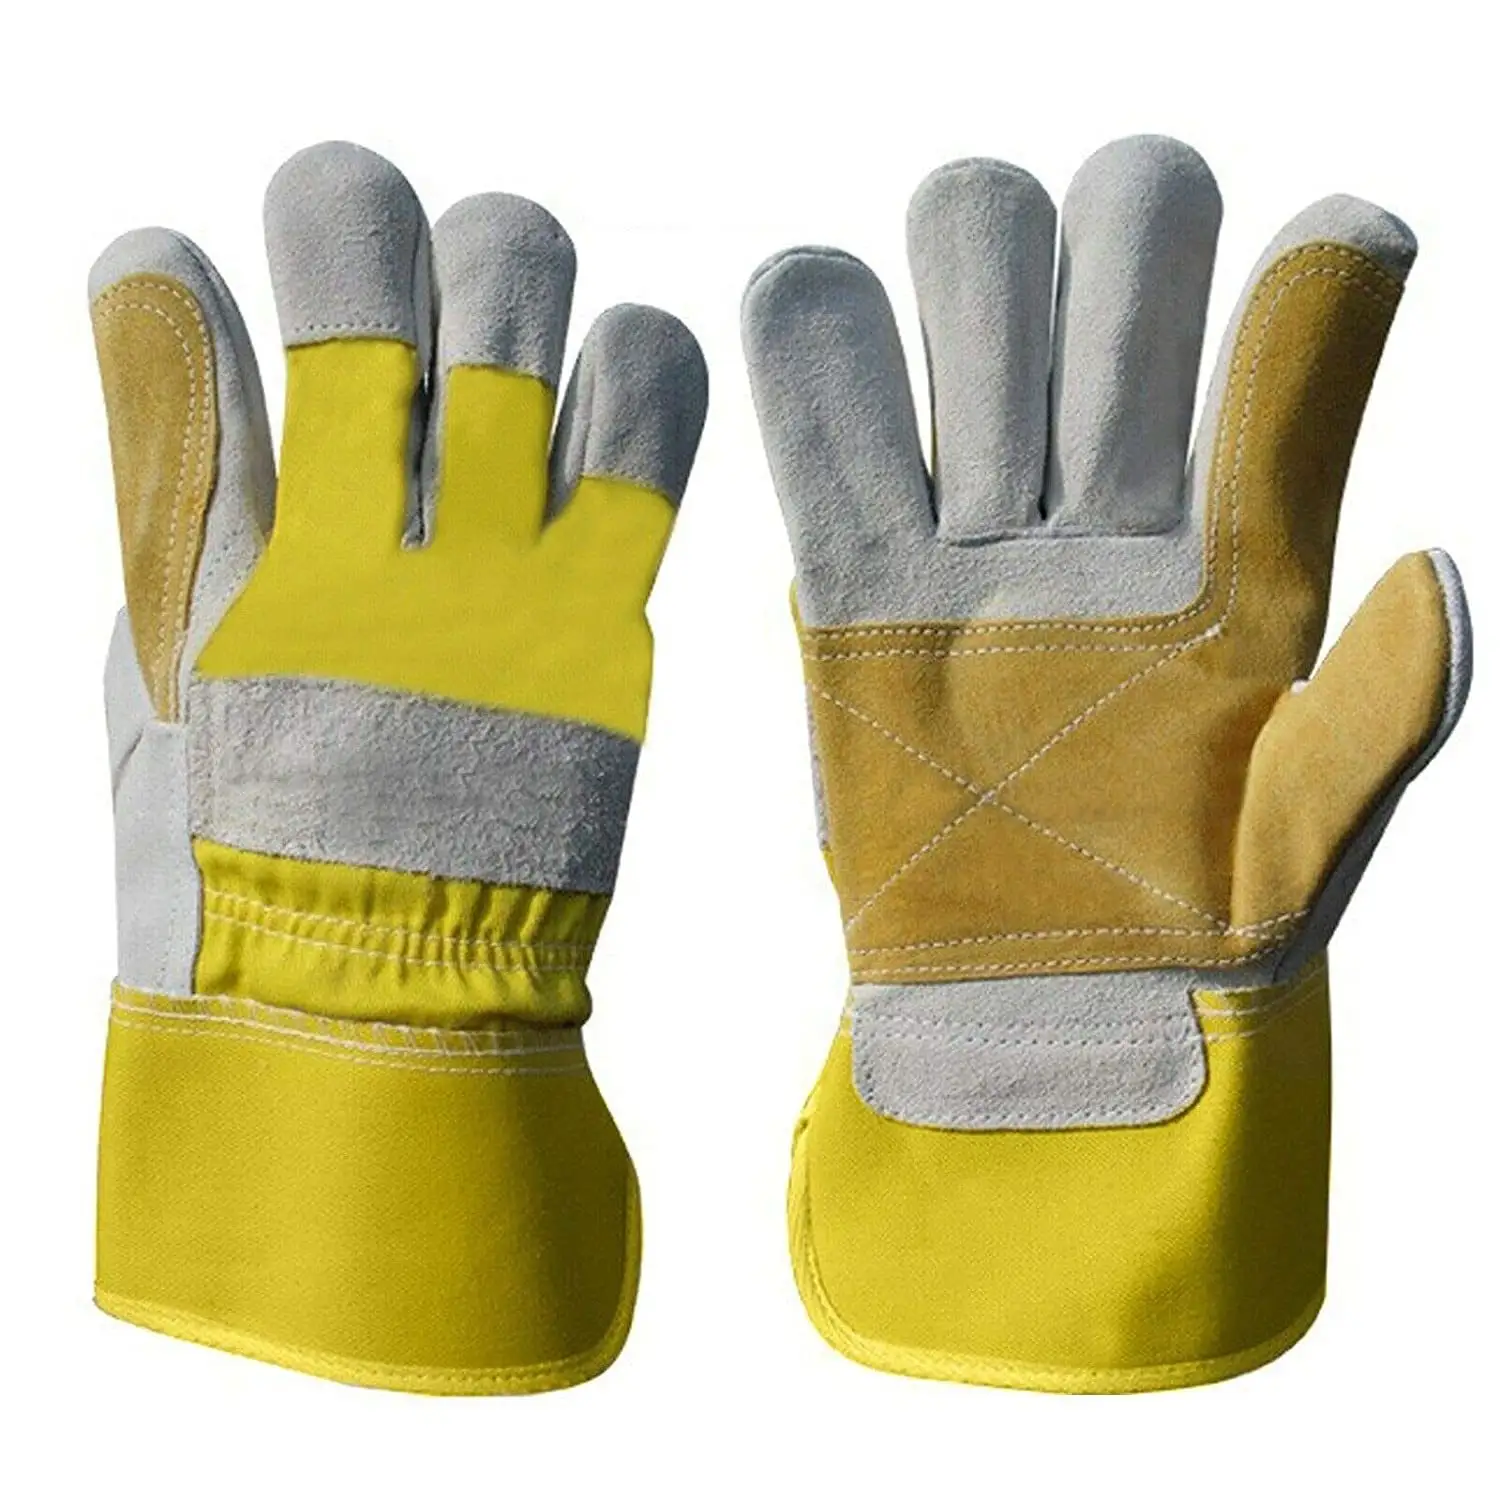 Winter Work Gloves Leather Safety Glove Rubber Cuff Industrial Safety Rigger Cow Split Leather Working Gloves